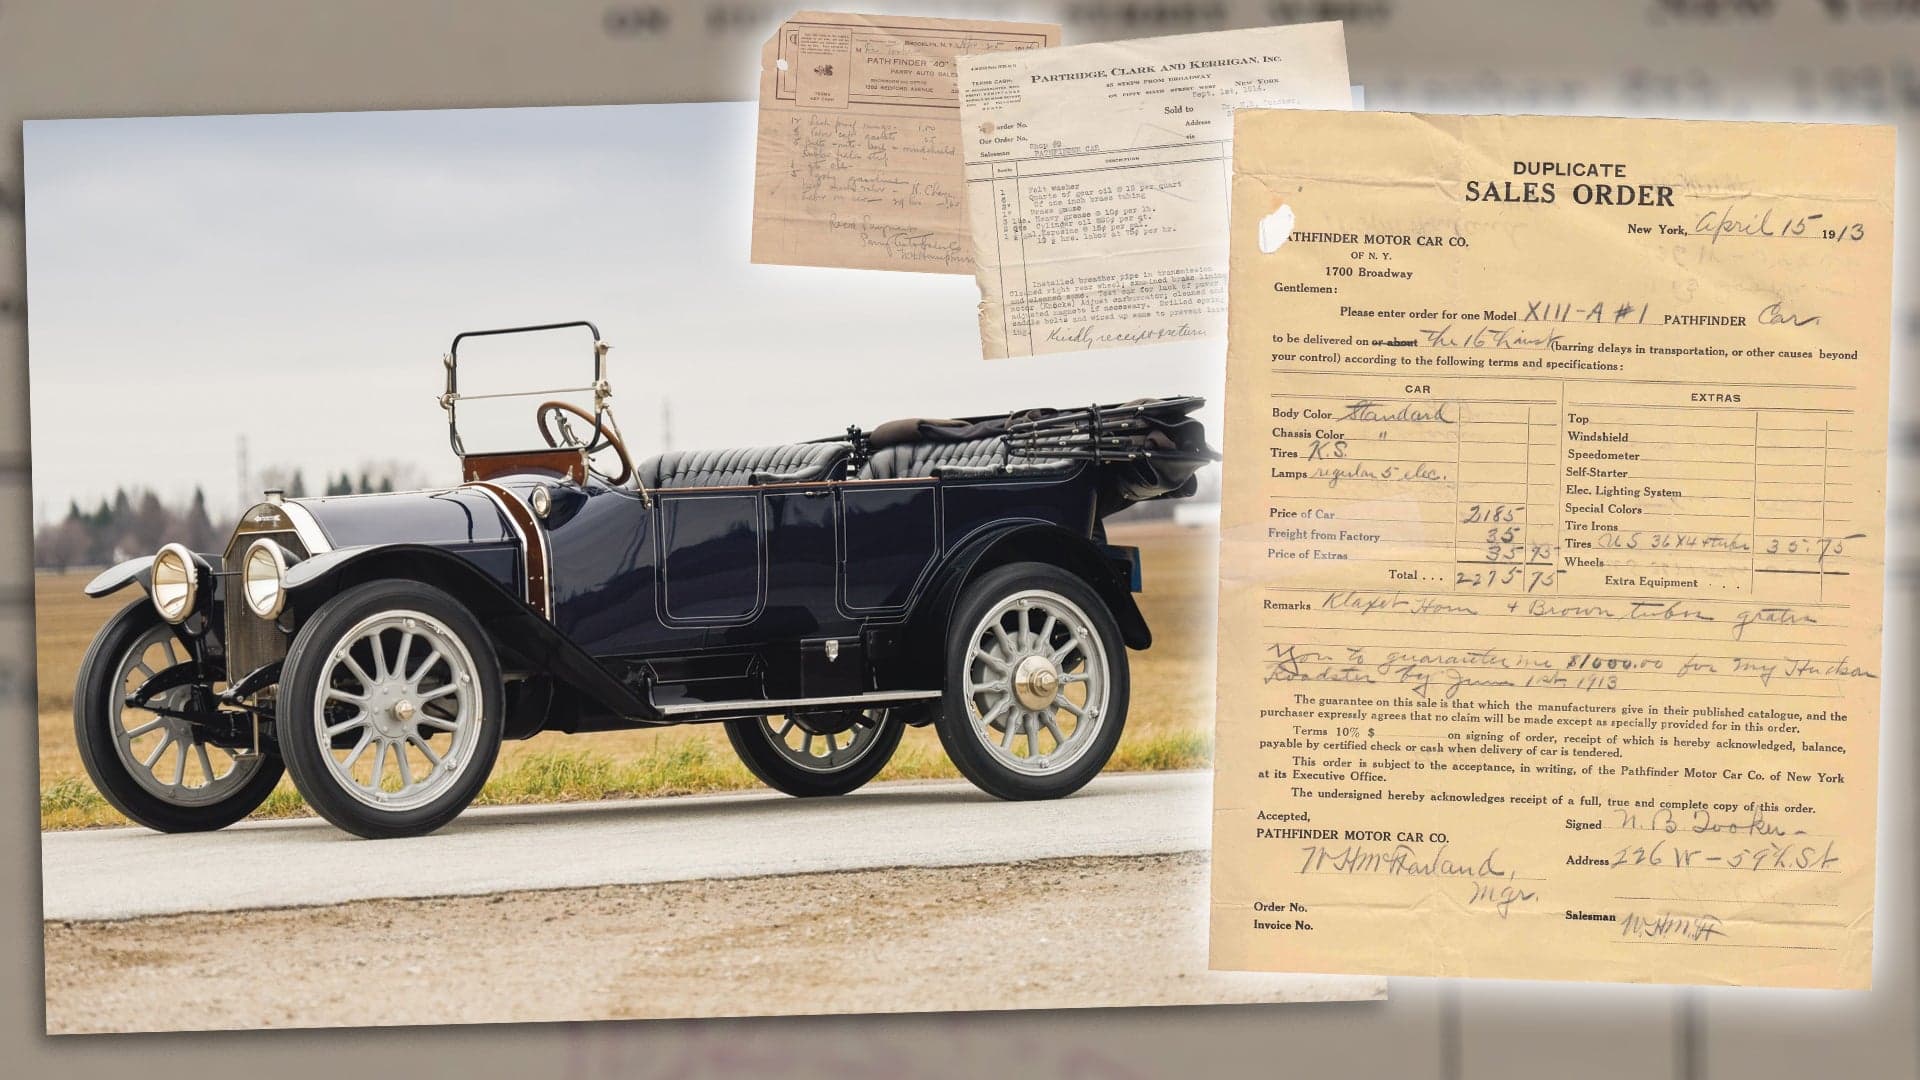 105-Year-Old Receipts Show the Car Purchases and Mods of an Early Enthusiast